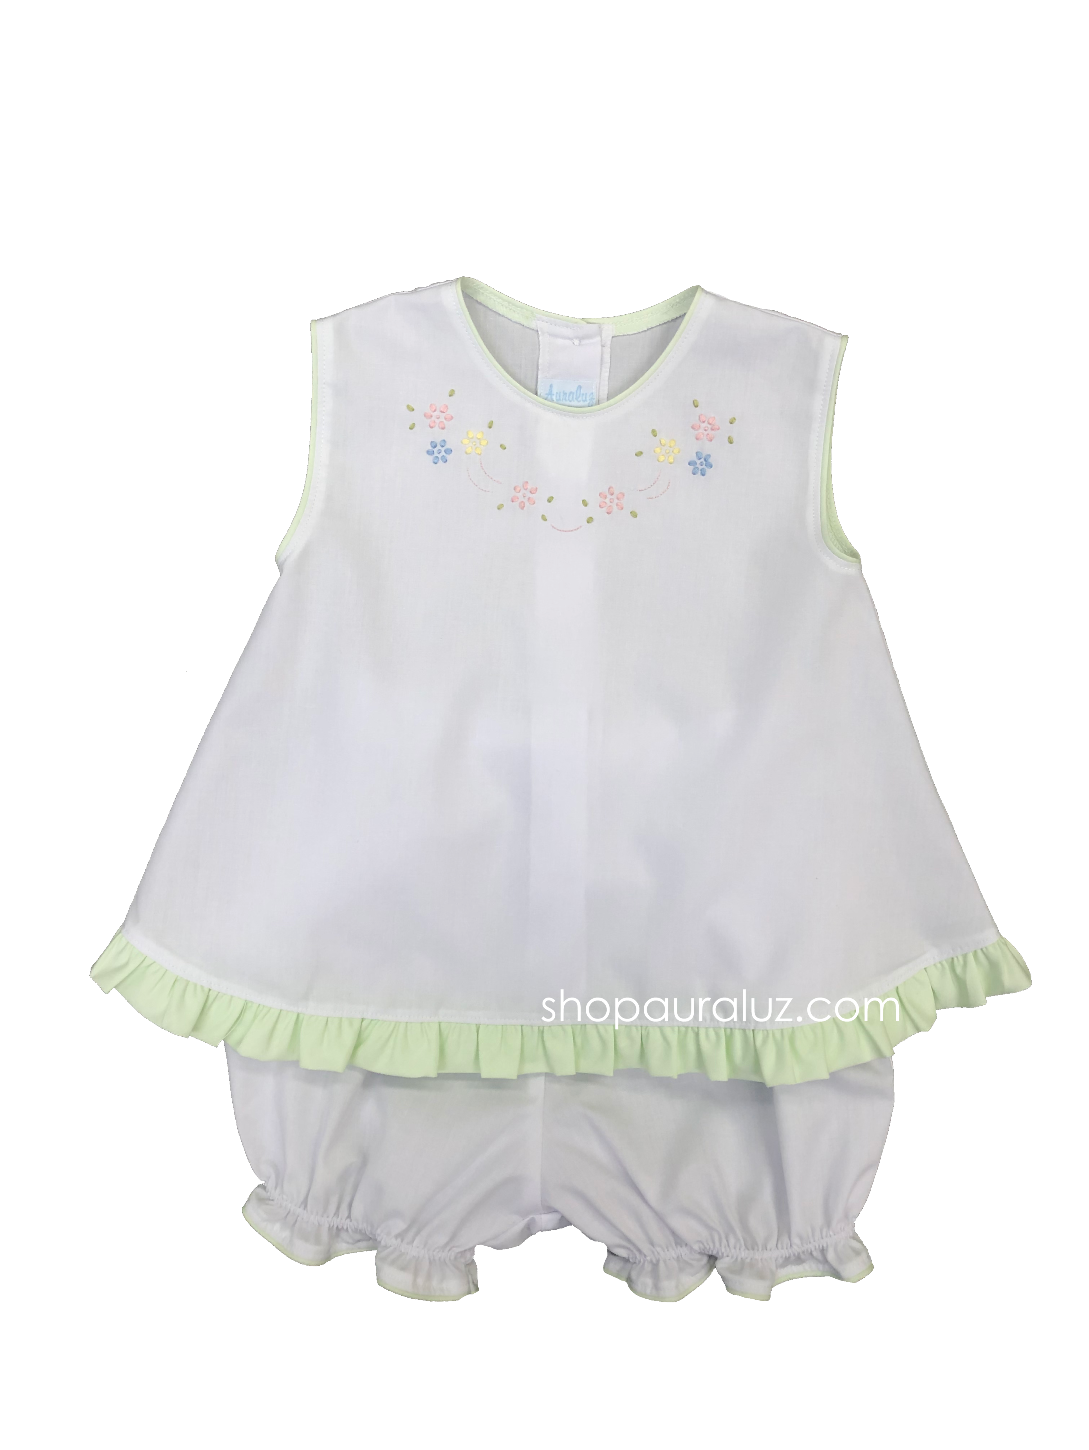 Auraluz Girl Sleeveless 2pc Set...White w/green ruffle trim and embroidered flowers